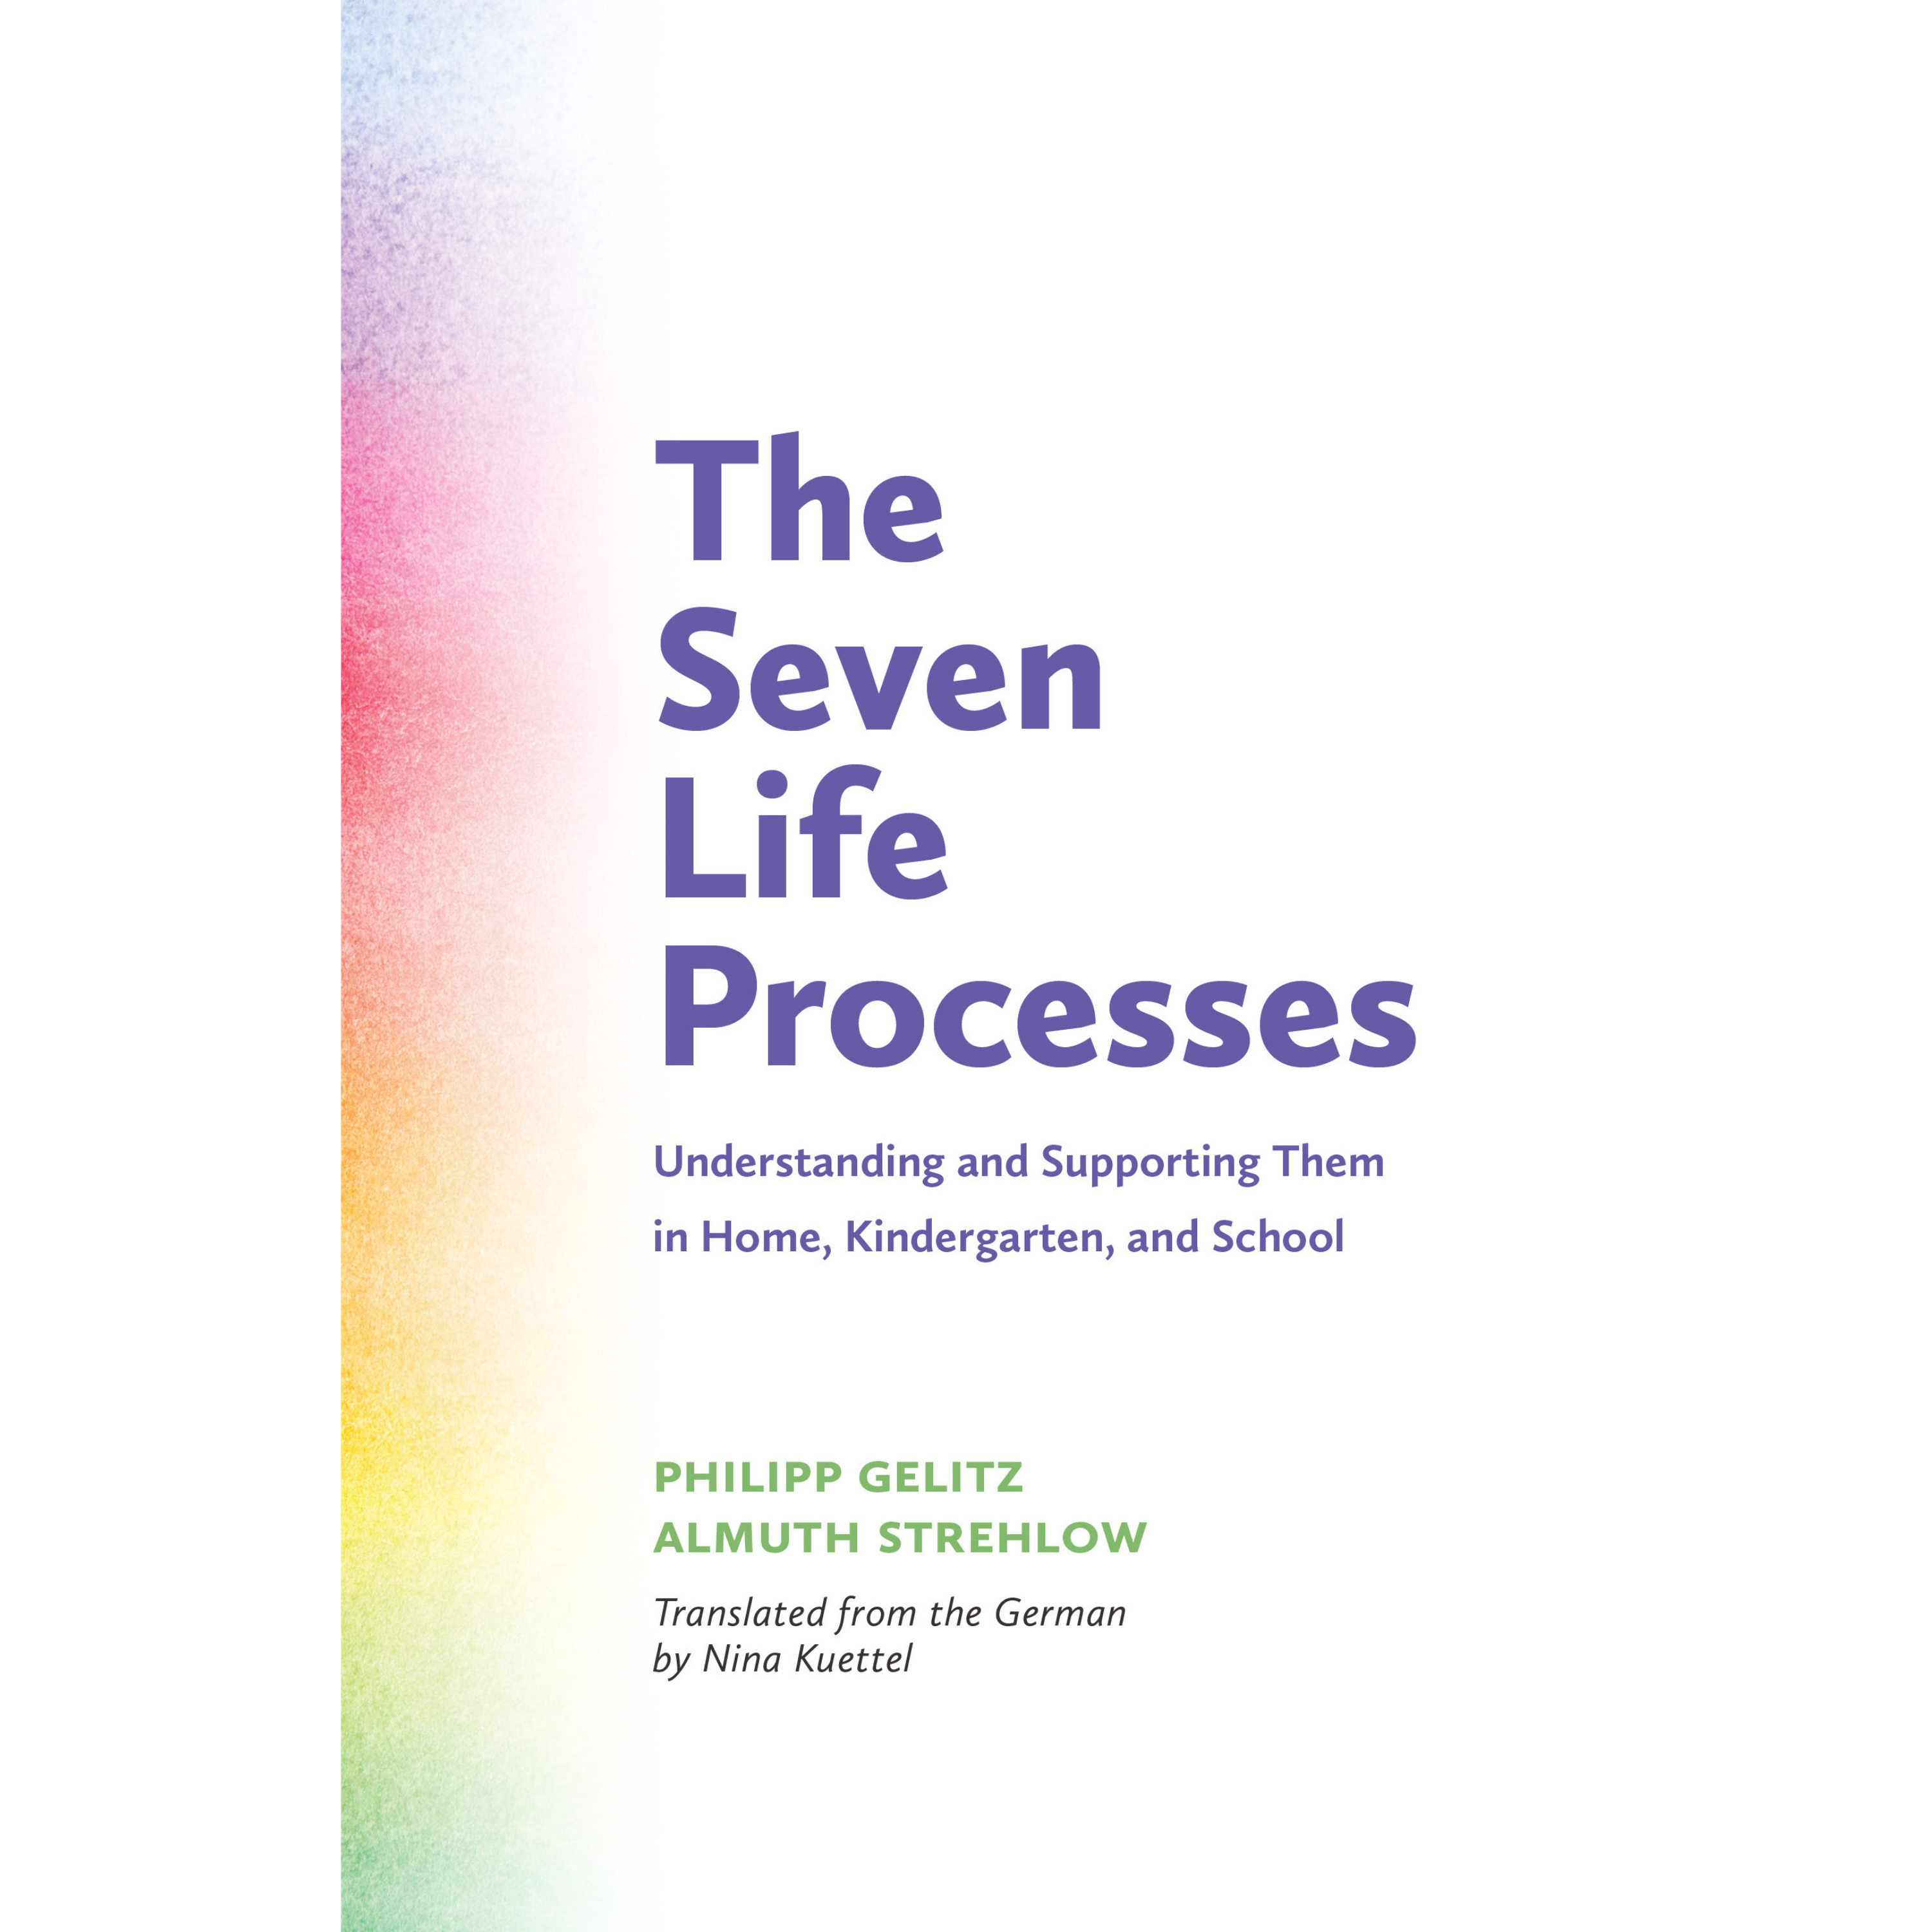 The Seven Life Processes - Understanding and Supporting Them in Home, Kindergarten, and School